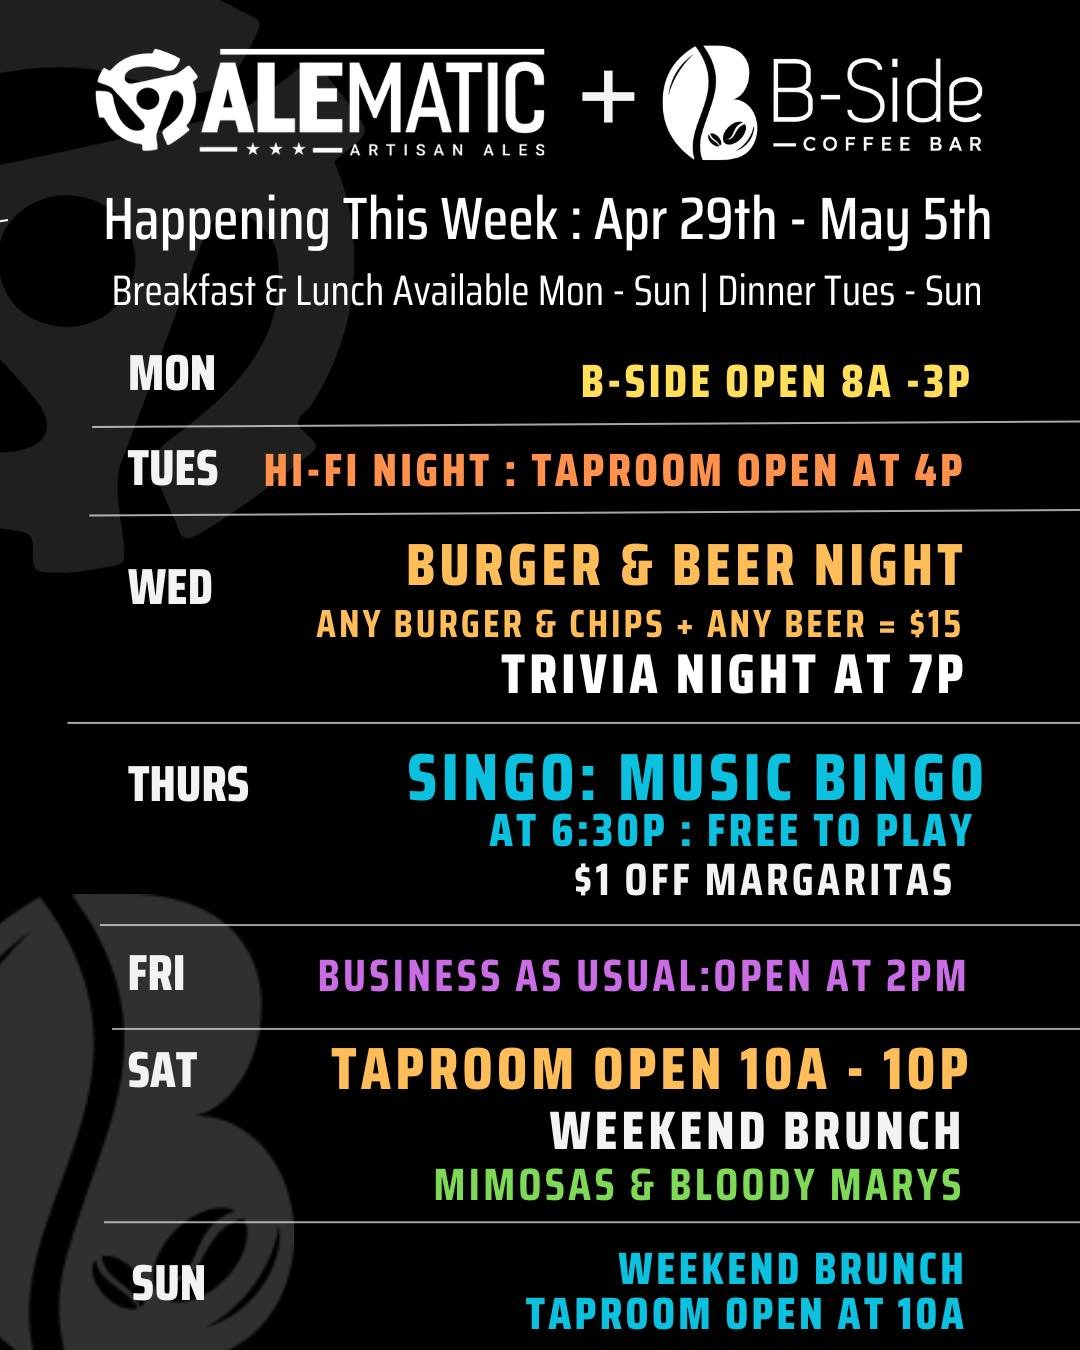 Happening this week! 

Mon: B-Side Open 8a-3p
Tues: Taproom open at 4p
Wed: Burger Night &amp; Trivia Night
Thurs: Music Bingo
Fri: Business as Usual
Sat: Brunch : open 10a -10p
Sun: Brunch : open 10a - 5p